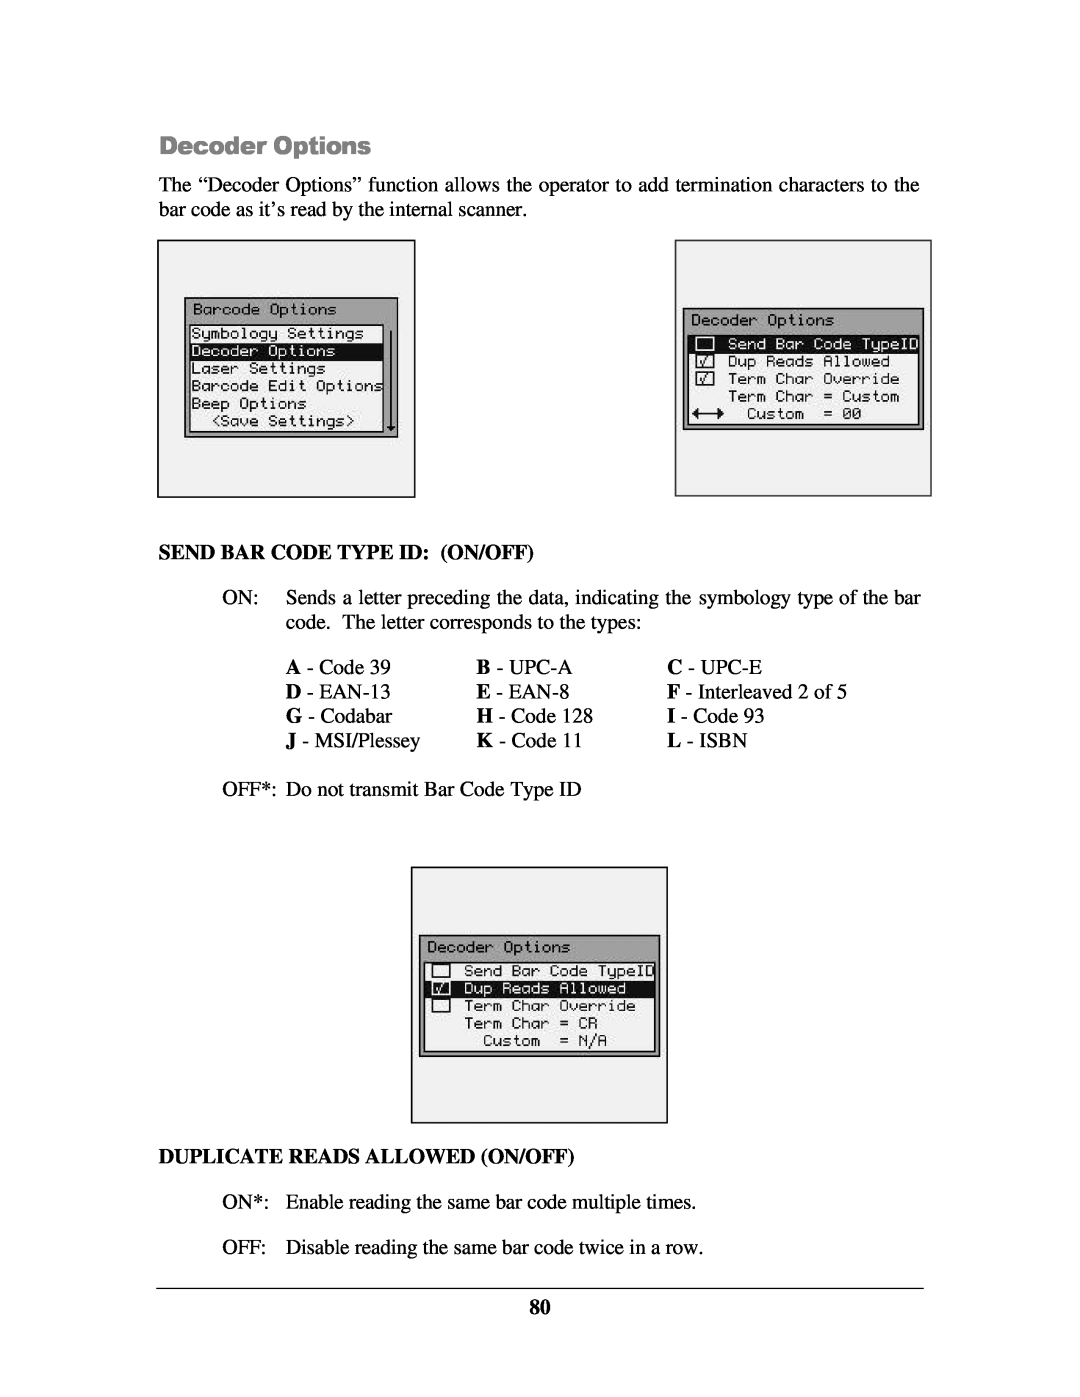 IBM M71V2 manual Decoder Options, Send Bar Code Type Id On/Off, Duplicate Reads Allowed On/Off 